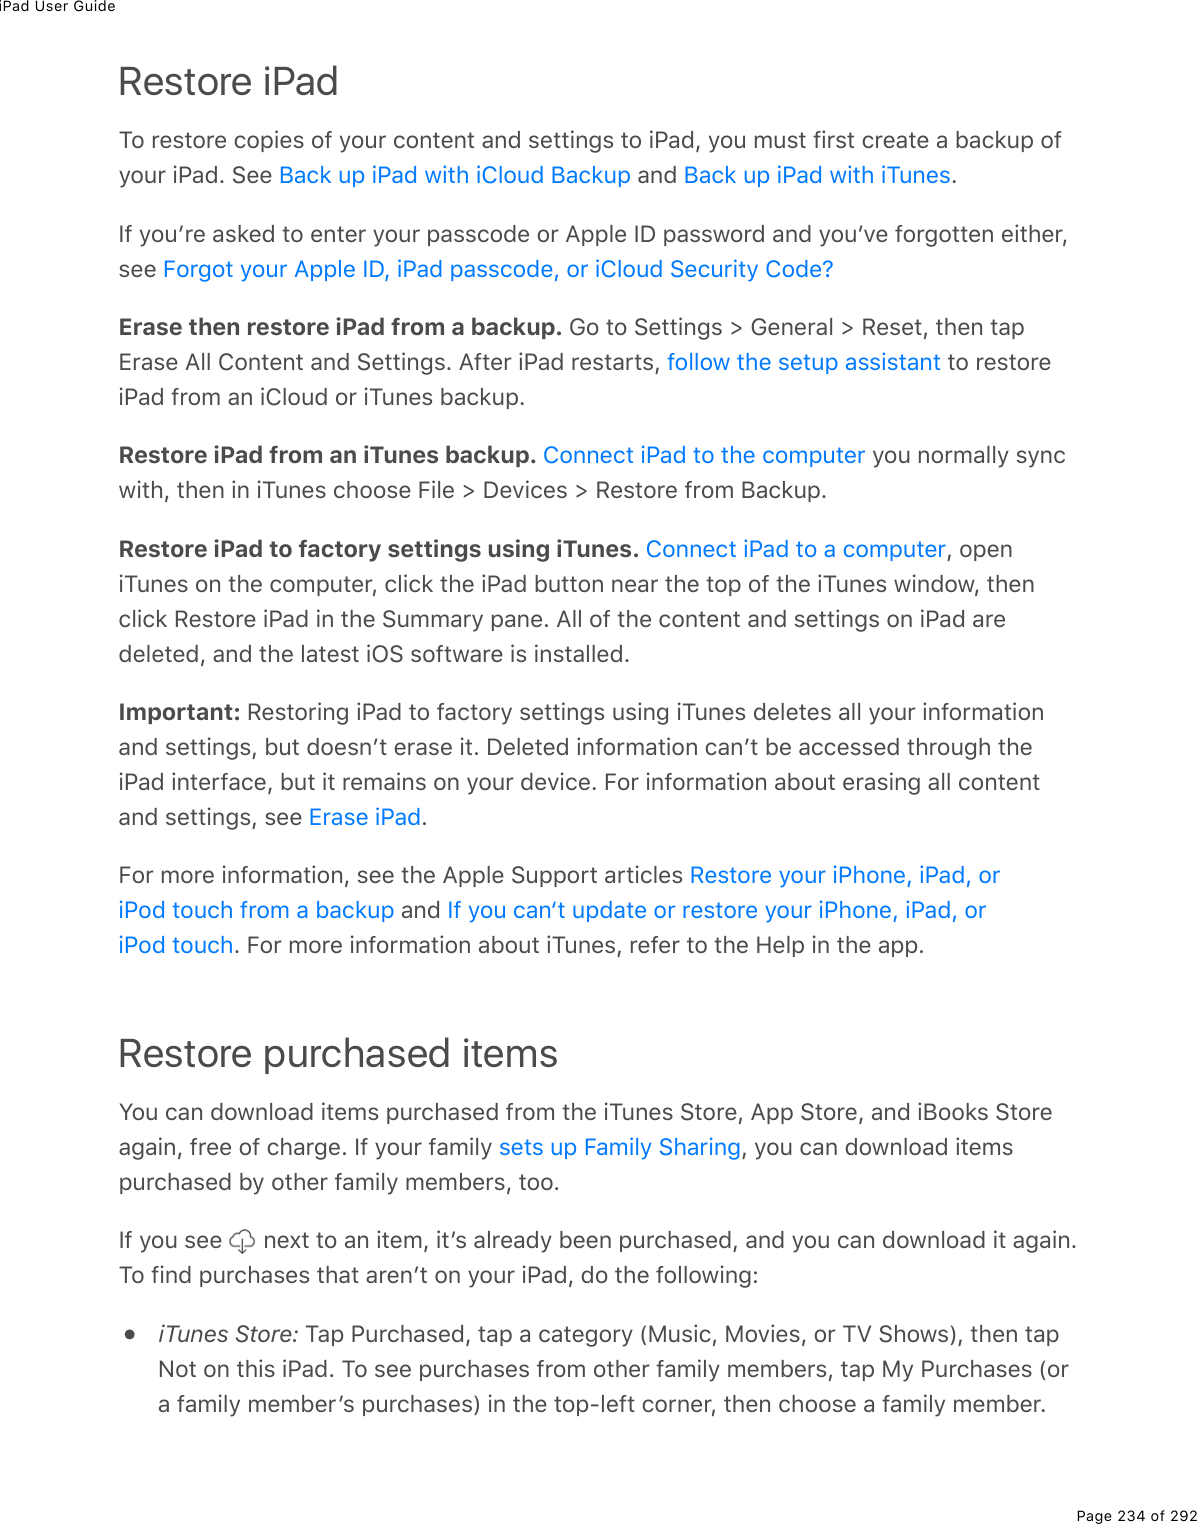 iPad User GuidePage 234 of 292Restore iPadTo restore copies of your content and settings to iPad, you must first create a backup ofyour iPad. See   and  .If youʼre asked to enter your passcode or Apple ID password and youʼve forgotten either,see Erase then restore iPad from a backup. Go to Settings &gt; General &gt; Reset, then tapErase All Content and Settings. After iPad restarts,   to restoreiPad from an iCloud or iTunes backup.Restore iPad from an iTunes backup.   you normally syncwith, then in iTunes choose File &gt; Devices &gt; Restore from Backup.Restore iPad to factory settings using iTunes.  , openiTunes on the computer, click the iPad button near the top of the iTunes window, thenclick Restore iPad in the Summary pane. All of the content and settings on iPad aredeleted, and the latest iOS software is installed.Important: Restoring iPad to factory settings using iTunes deletes all your informationand settings, but doesnʼt erase it. Deleted information canʼt be accessed through theiPad interface, but it remains on your device. For information about erasing all contentand settings, see  .For more information, see the Apple Support articles  and . For more information about iTunes, refer to the Help in the app.Restore purchased itemsYou can download items purchased from the iTunes Store, App Store, and iBooks Storeagain, free of charge. If your family  , you can download itemspurchased by other family members, too.If you see   next to an item, itʼs already been purchased, and you can download it again.To find purchases that arenʼt on your iPad, do the following:iTunes Store: Tap Purchased, tap a category (Music, Movies, or TV Shows), then tapNot on this iPad. To see purchases from other family members, tap My Purchases (ora family memberʼs purchases) in the top-left corner, then choose a family member.Back up iPad with iCloud Backup Back up iPad with iTunesForgot your Apple ID, iPad passcode, or iCloud Security Code?follow the setup assistantConnect iPad to the computerConnect iPad to a computerErase iPadRestore your iPhone, iPad, oriPod touch from a backup If you can‘t update or restore your iPhone, iPad, oriPod touchsets up Family Sharing